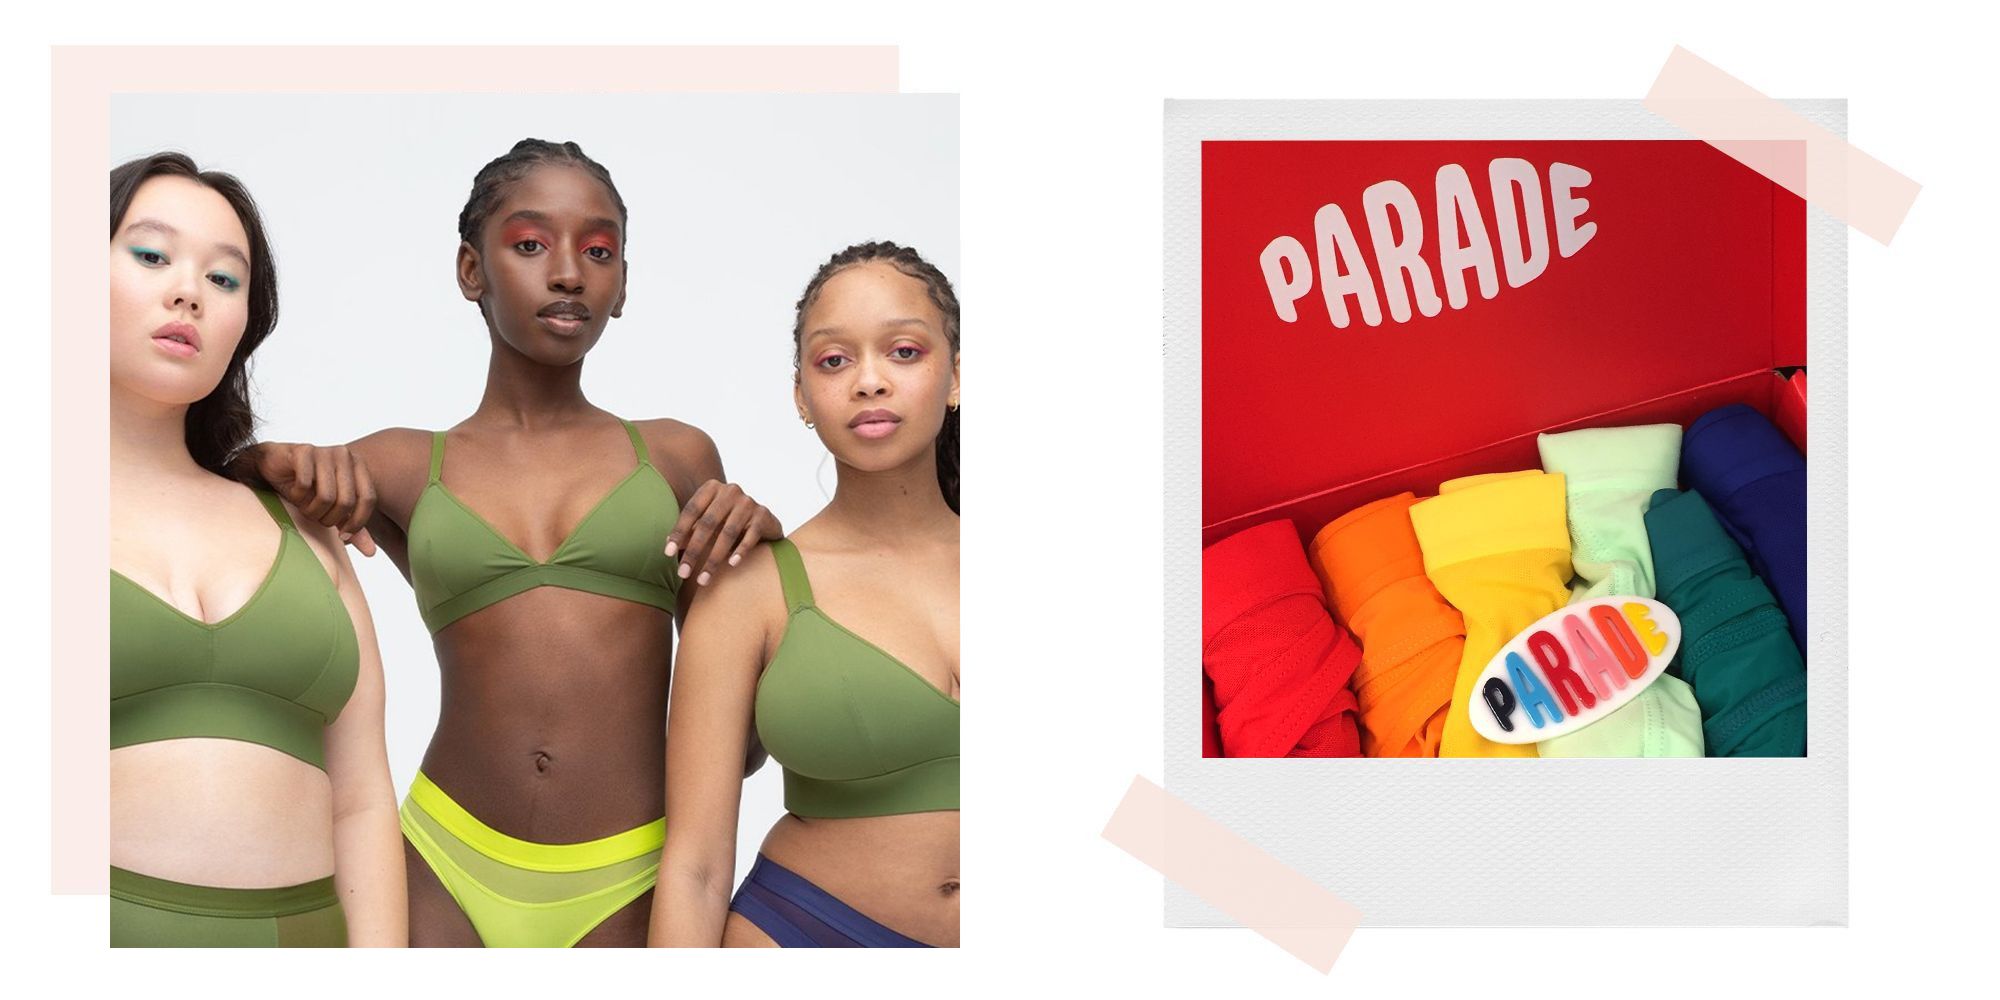 Parade Is Stepping Into a New Category With Its Scoop and Triangle Bralettes